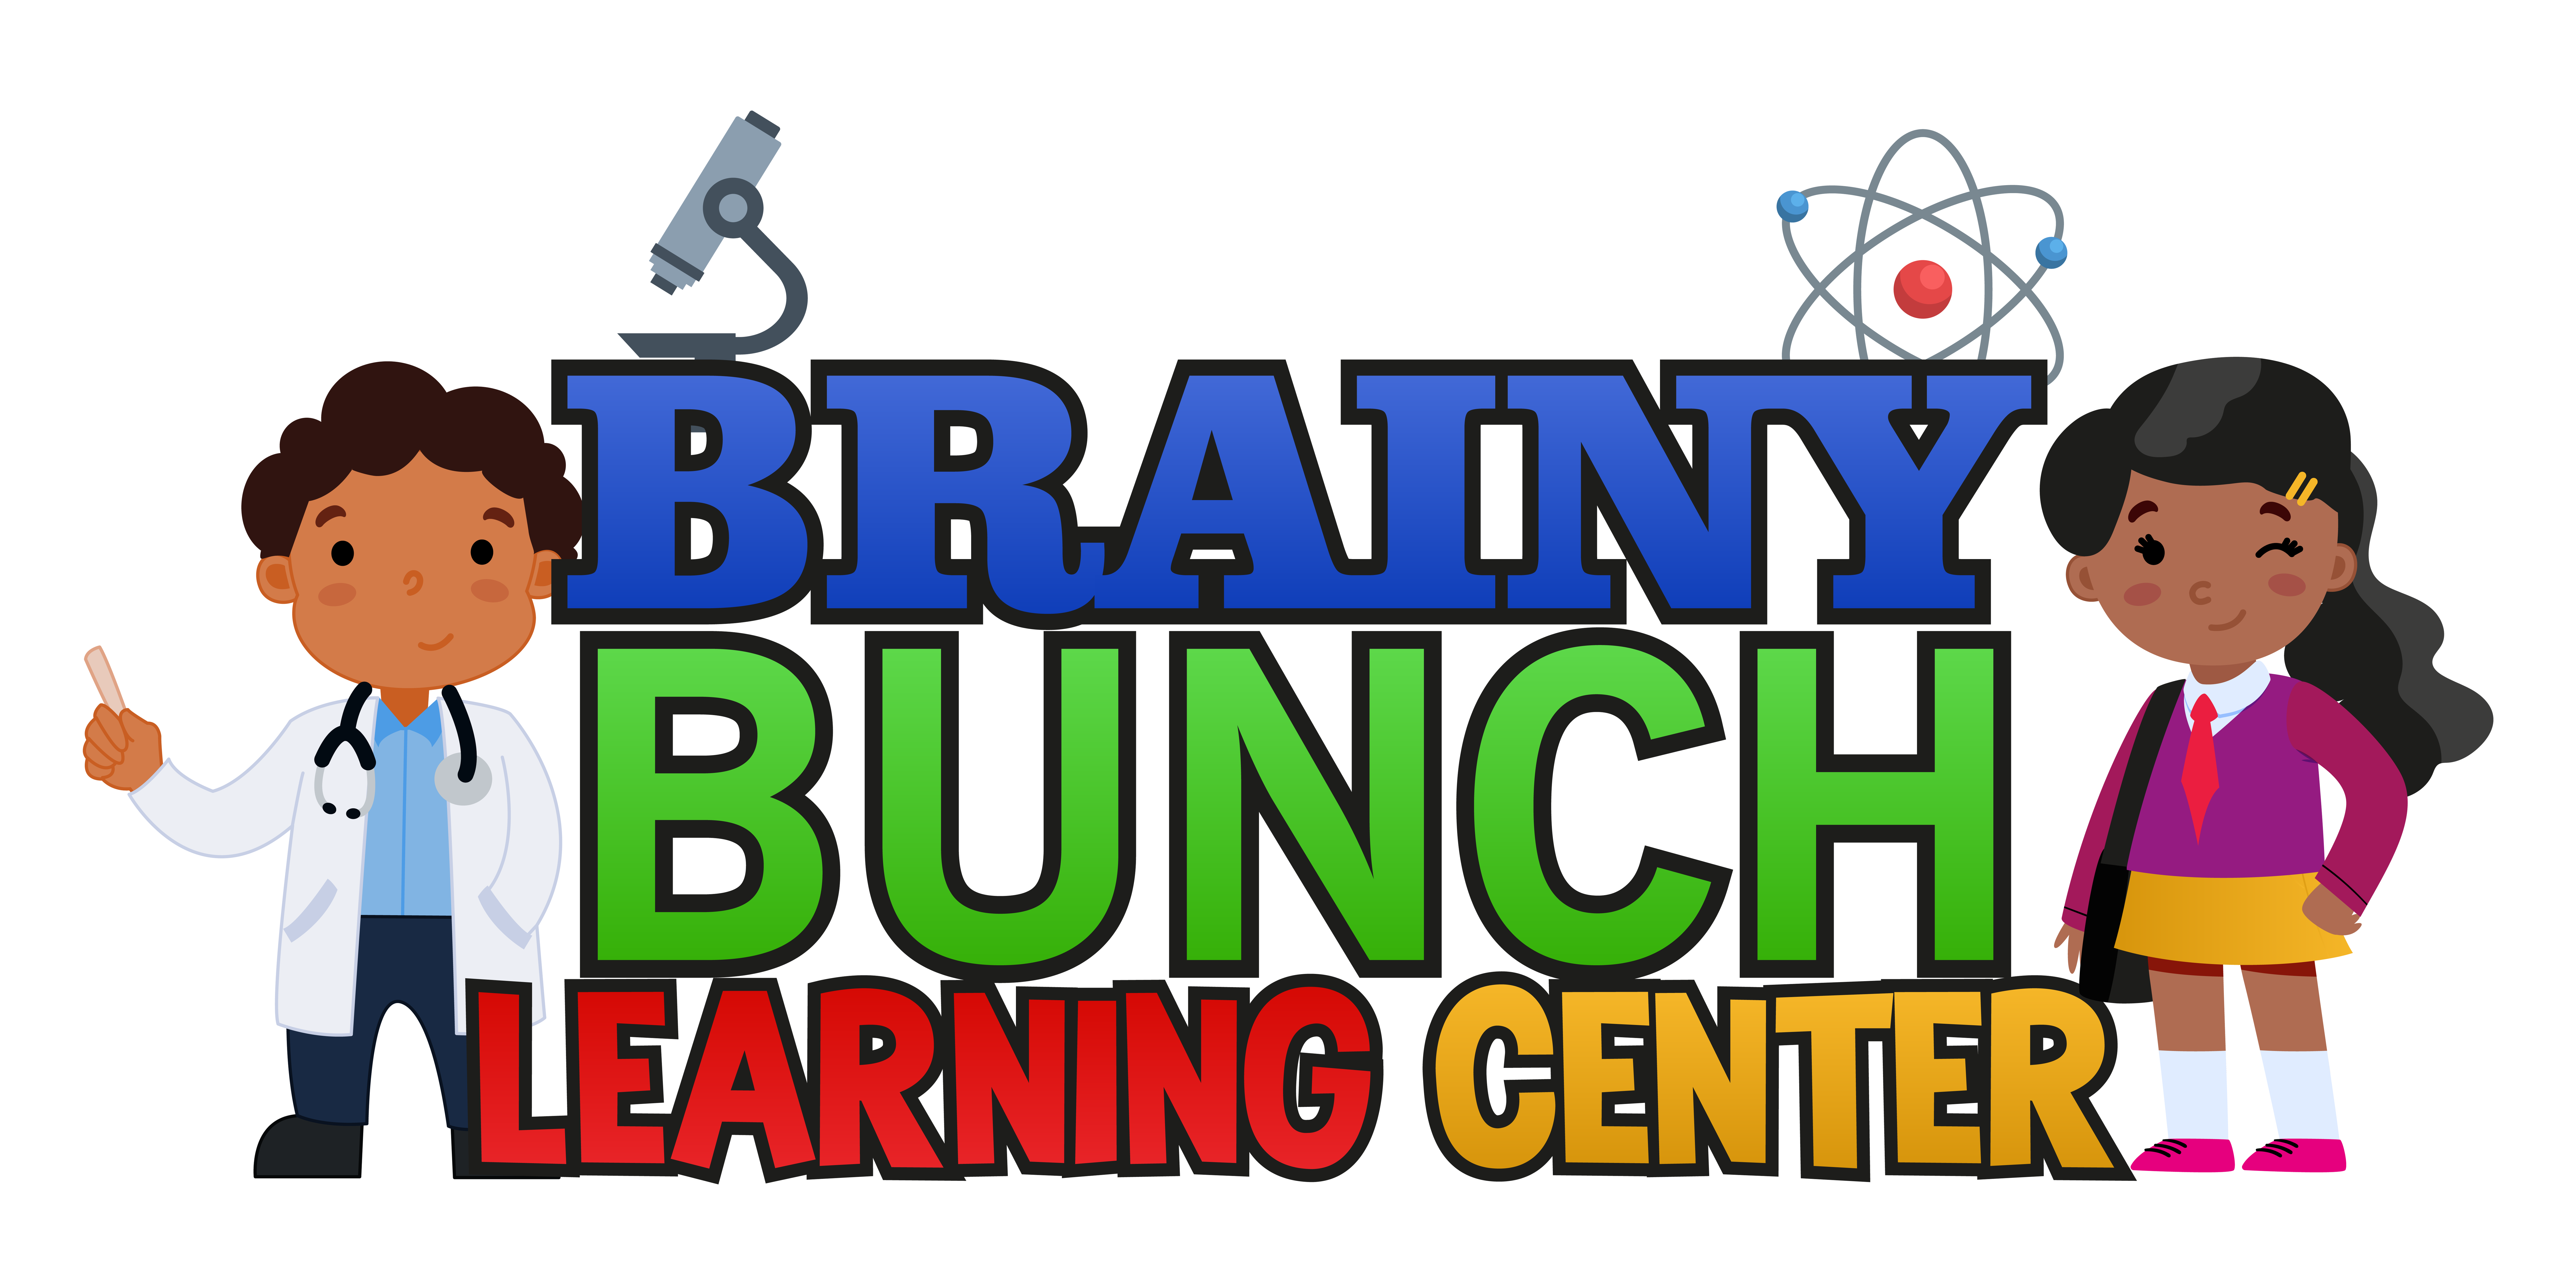 Brainy Bunch with outline copy (1)